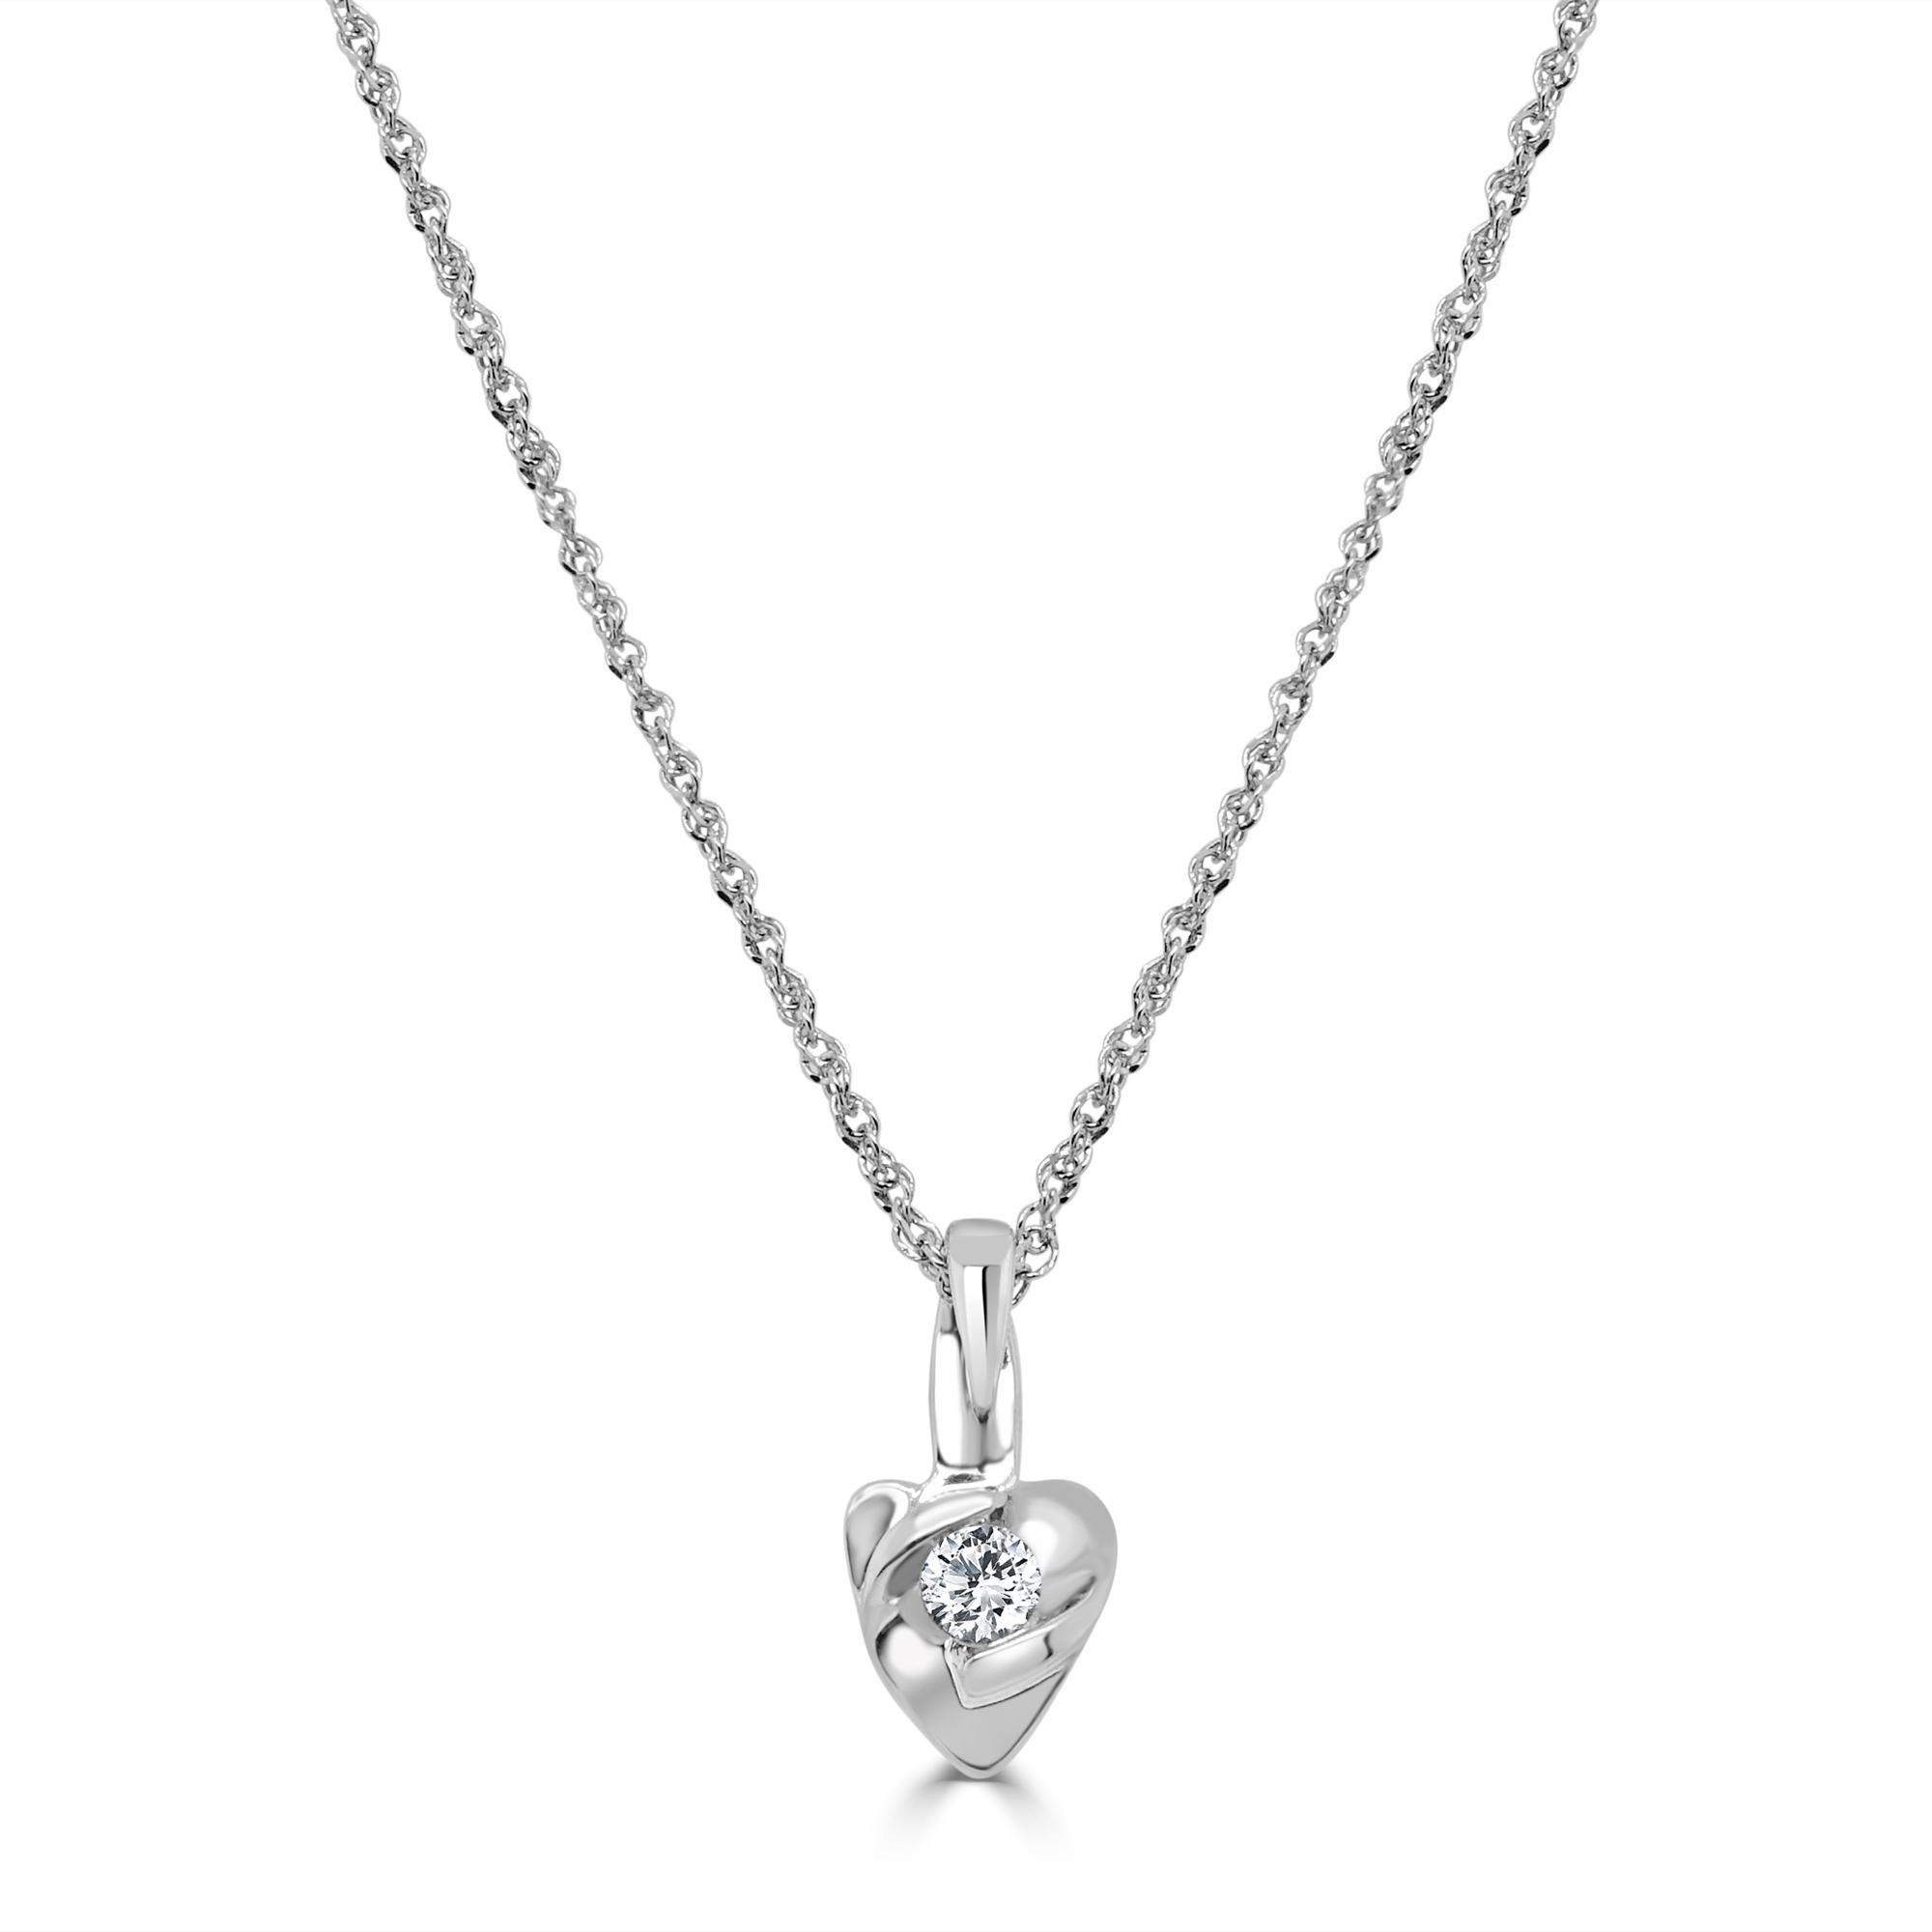 18 Karat White Gold 0.09 Carat Diamond Chain Necklace Wedding Fine Jewelry 

You will fall head over heels in love with this breathtaking heart shape pendant.Gentle and elegant heart shape pendant is crafted in a sleek white gold. Featuring round